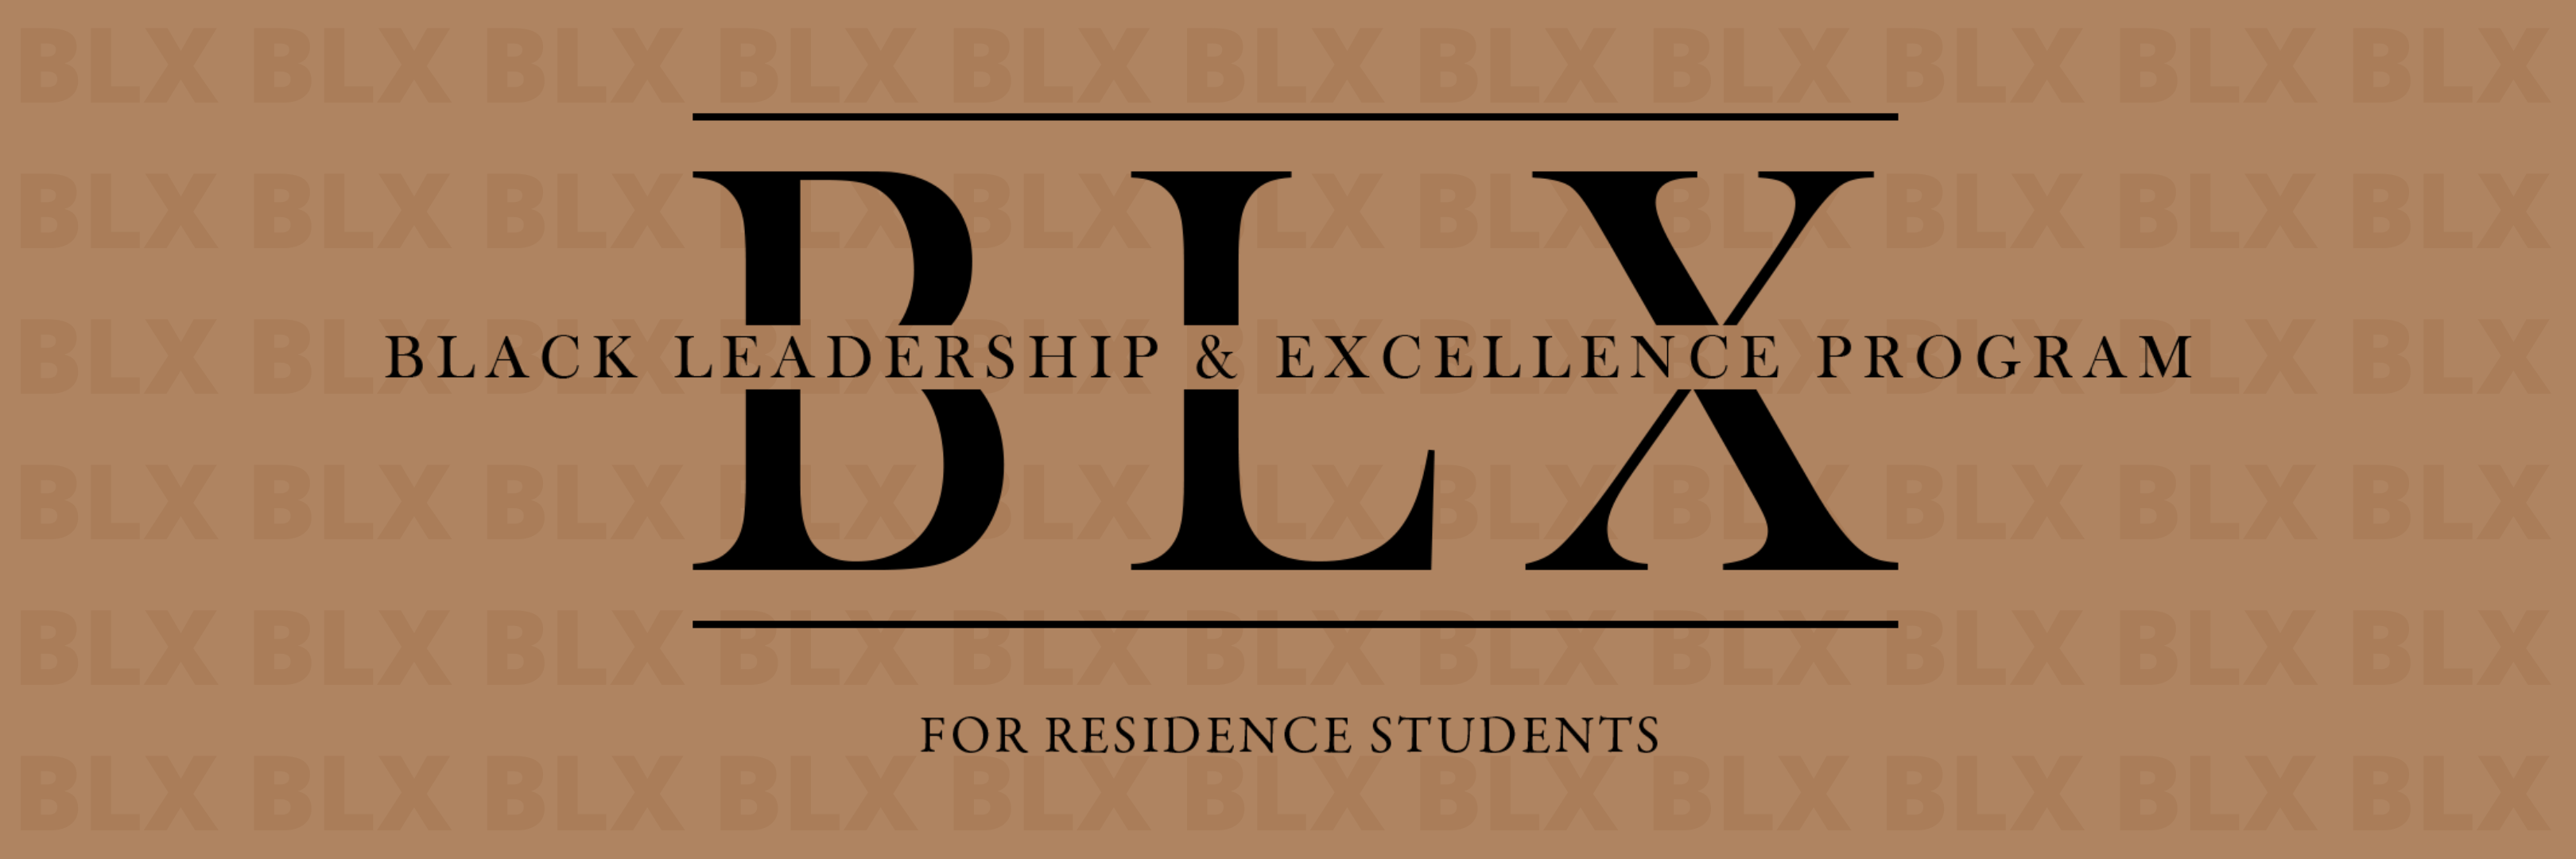 black leadership and excellence program